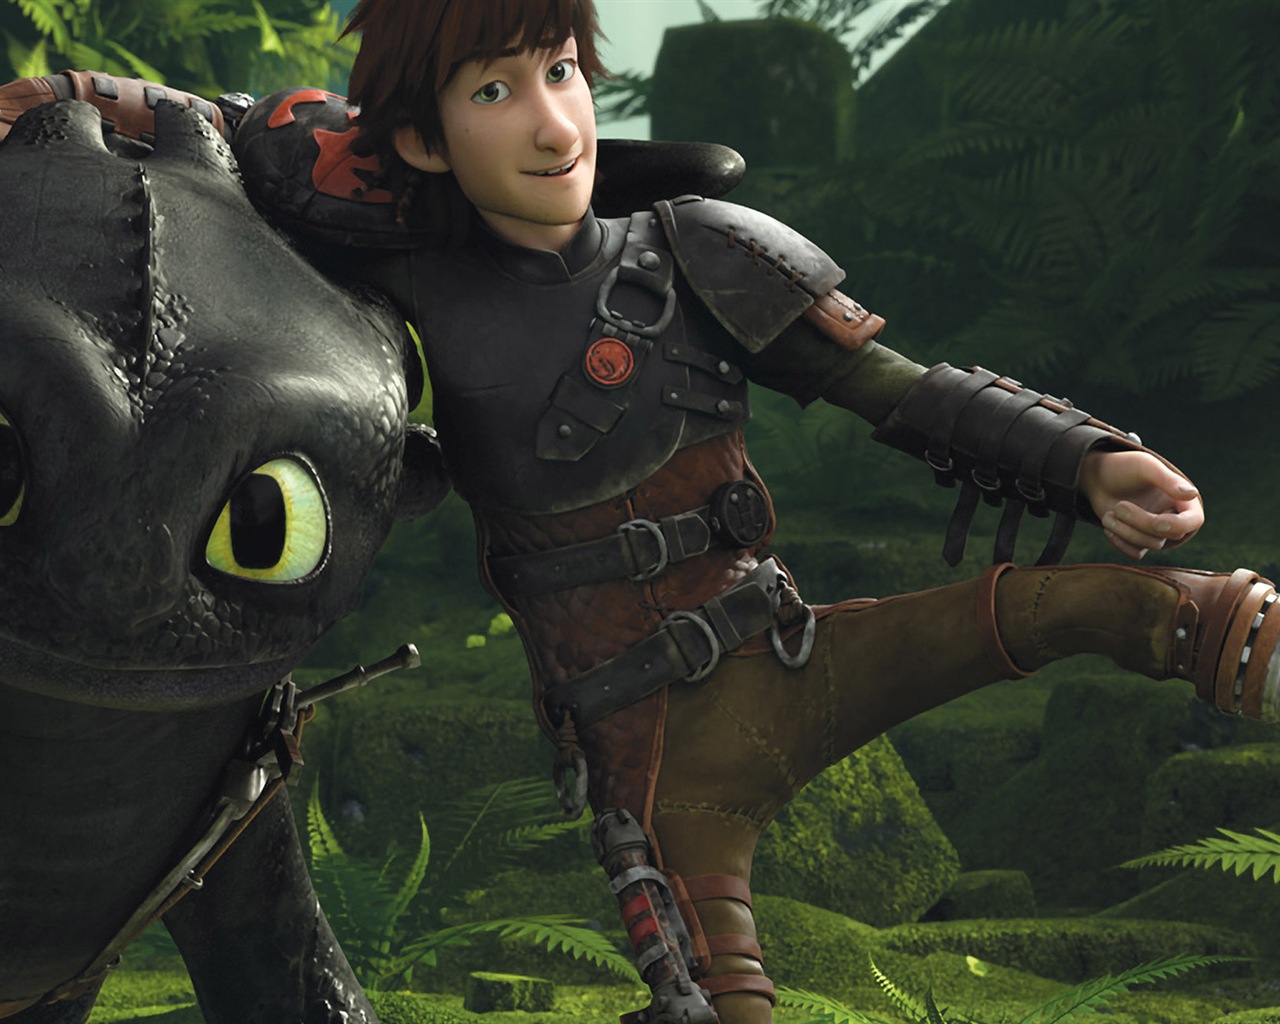 How to Train Your Dragon 2 HD wallpapers #3 - 1280x1024